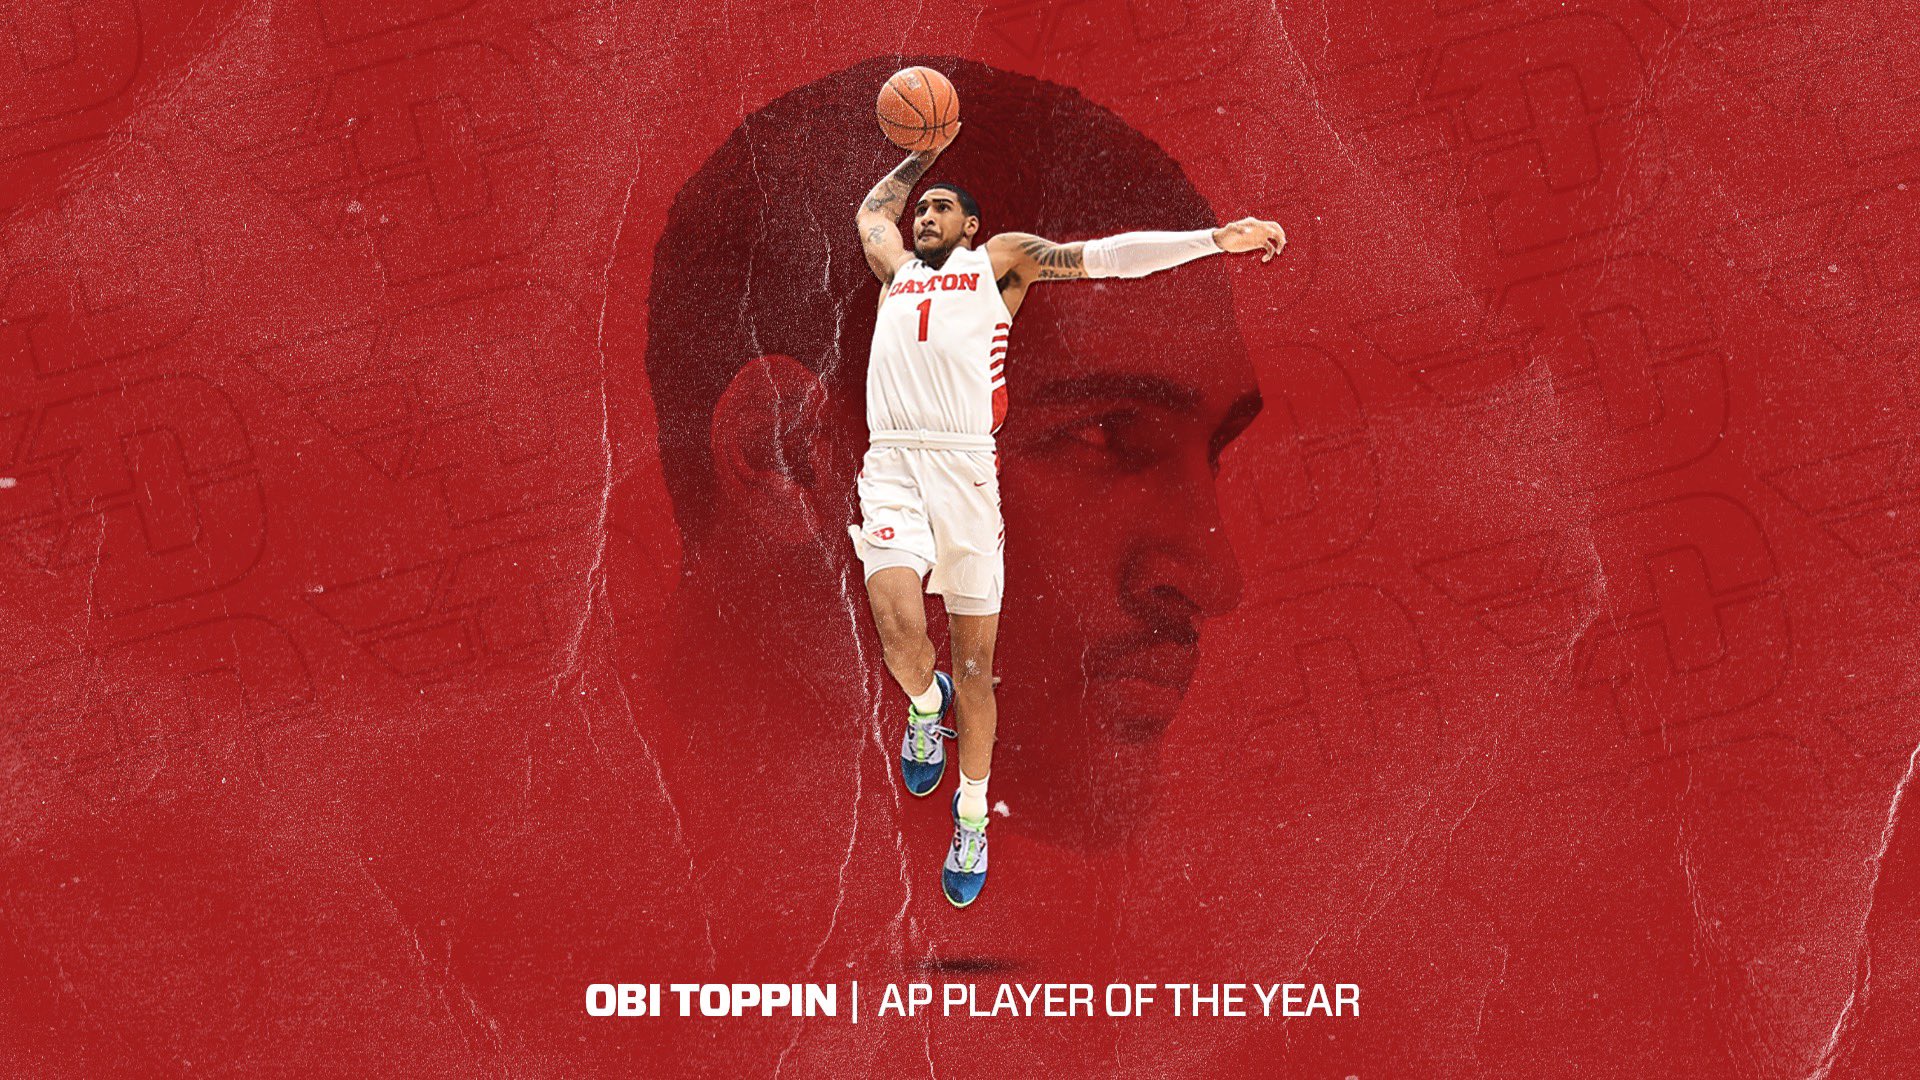 Player of the year. Obi Toppin hair.